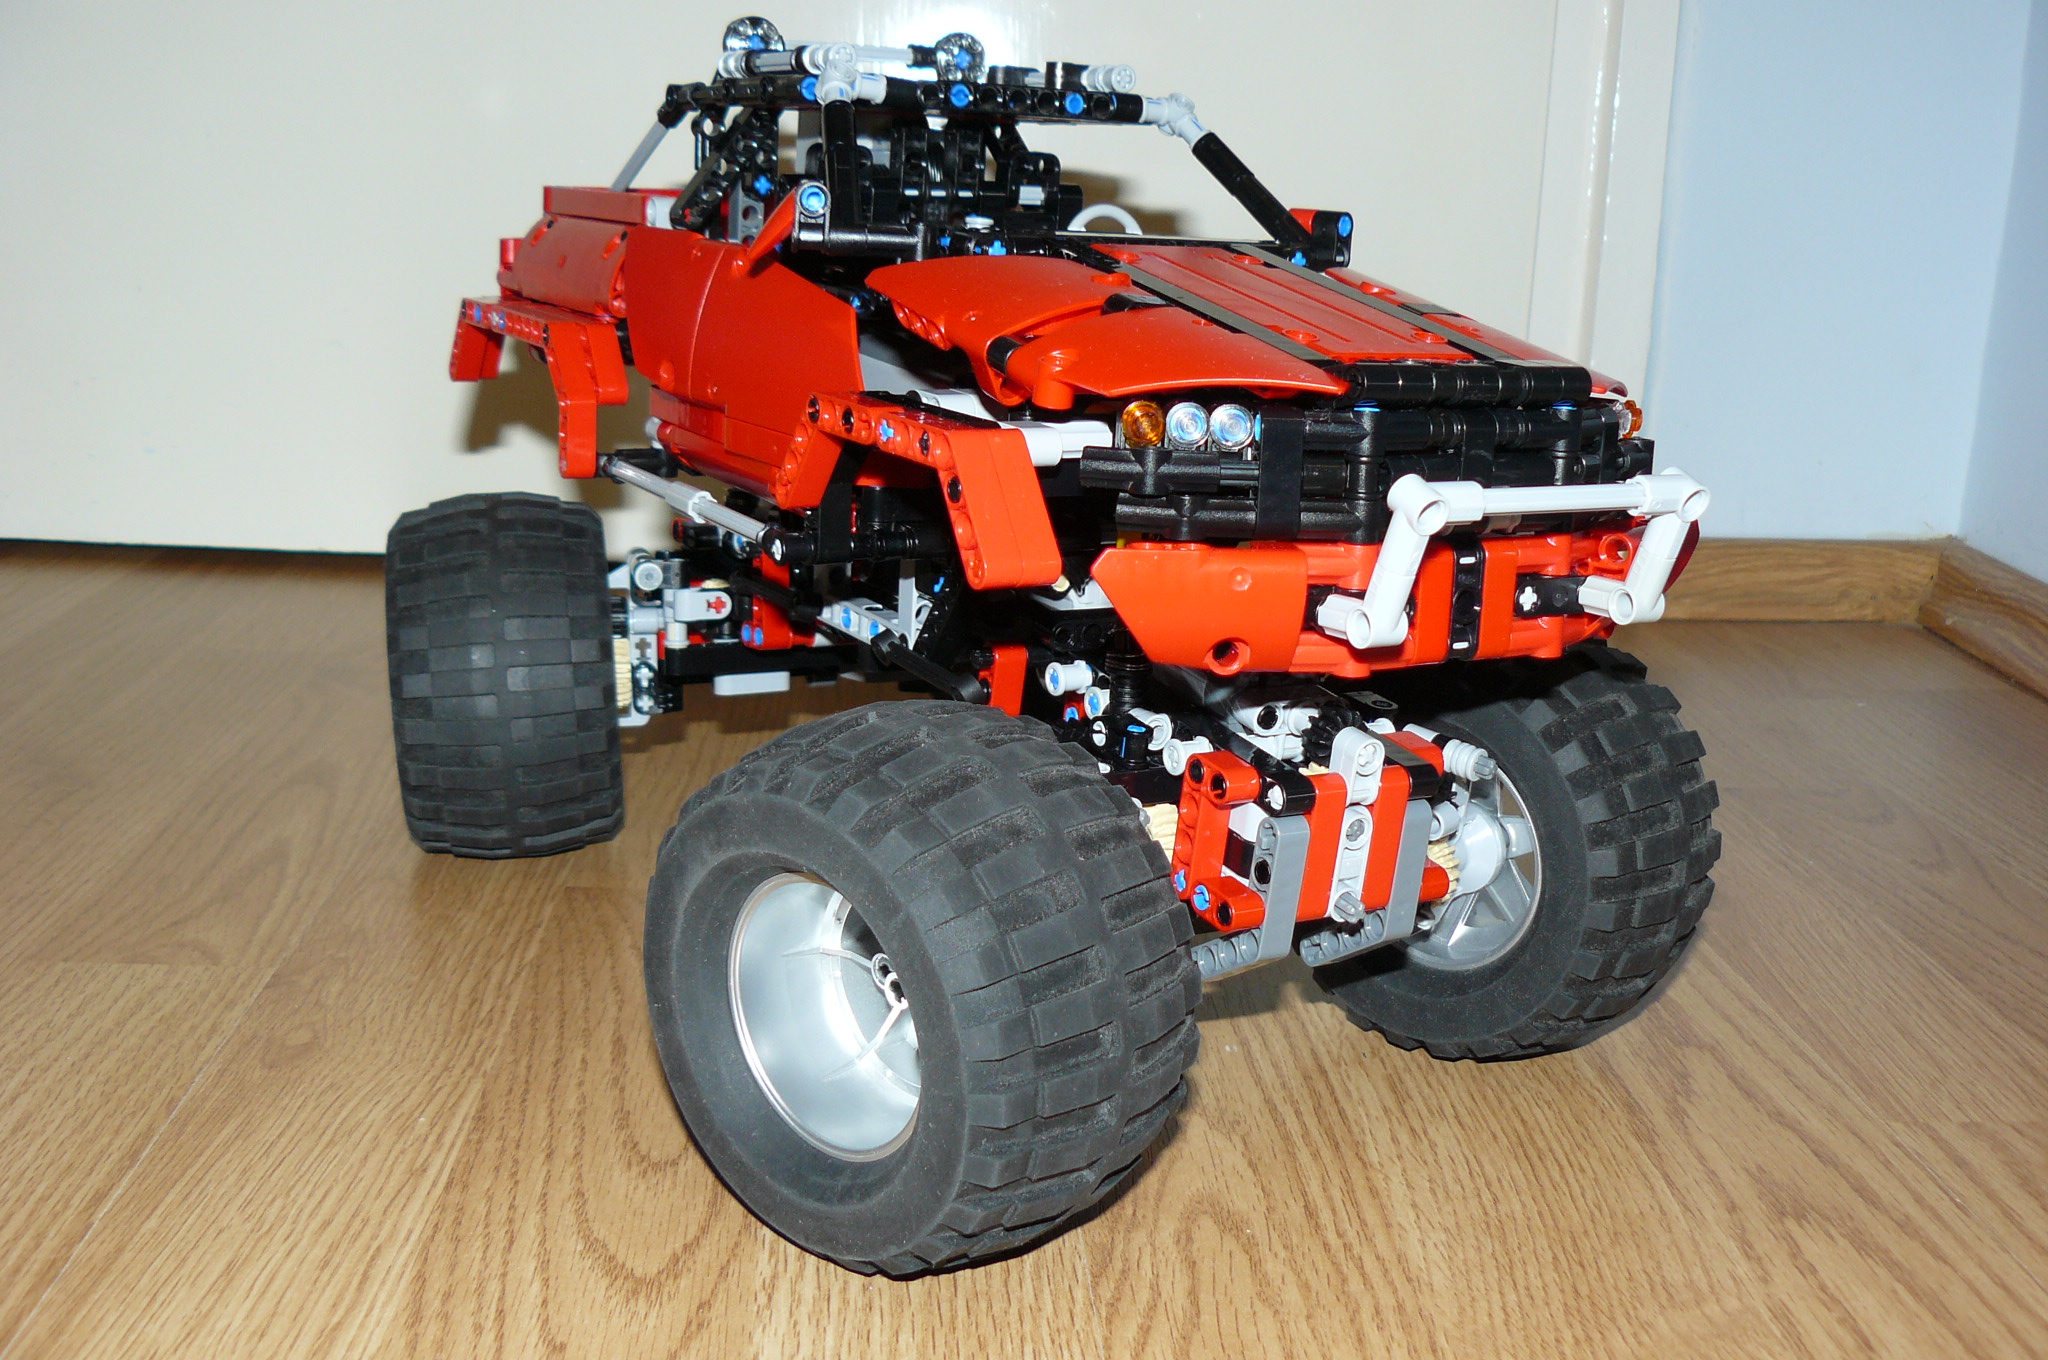 9398 - Lego Technic 4x4 Crawler - Page 4 - LEGO Technic, Mindstorms, Model Team and Scale 